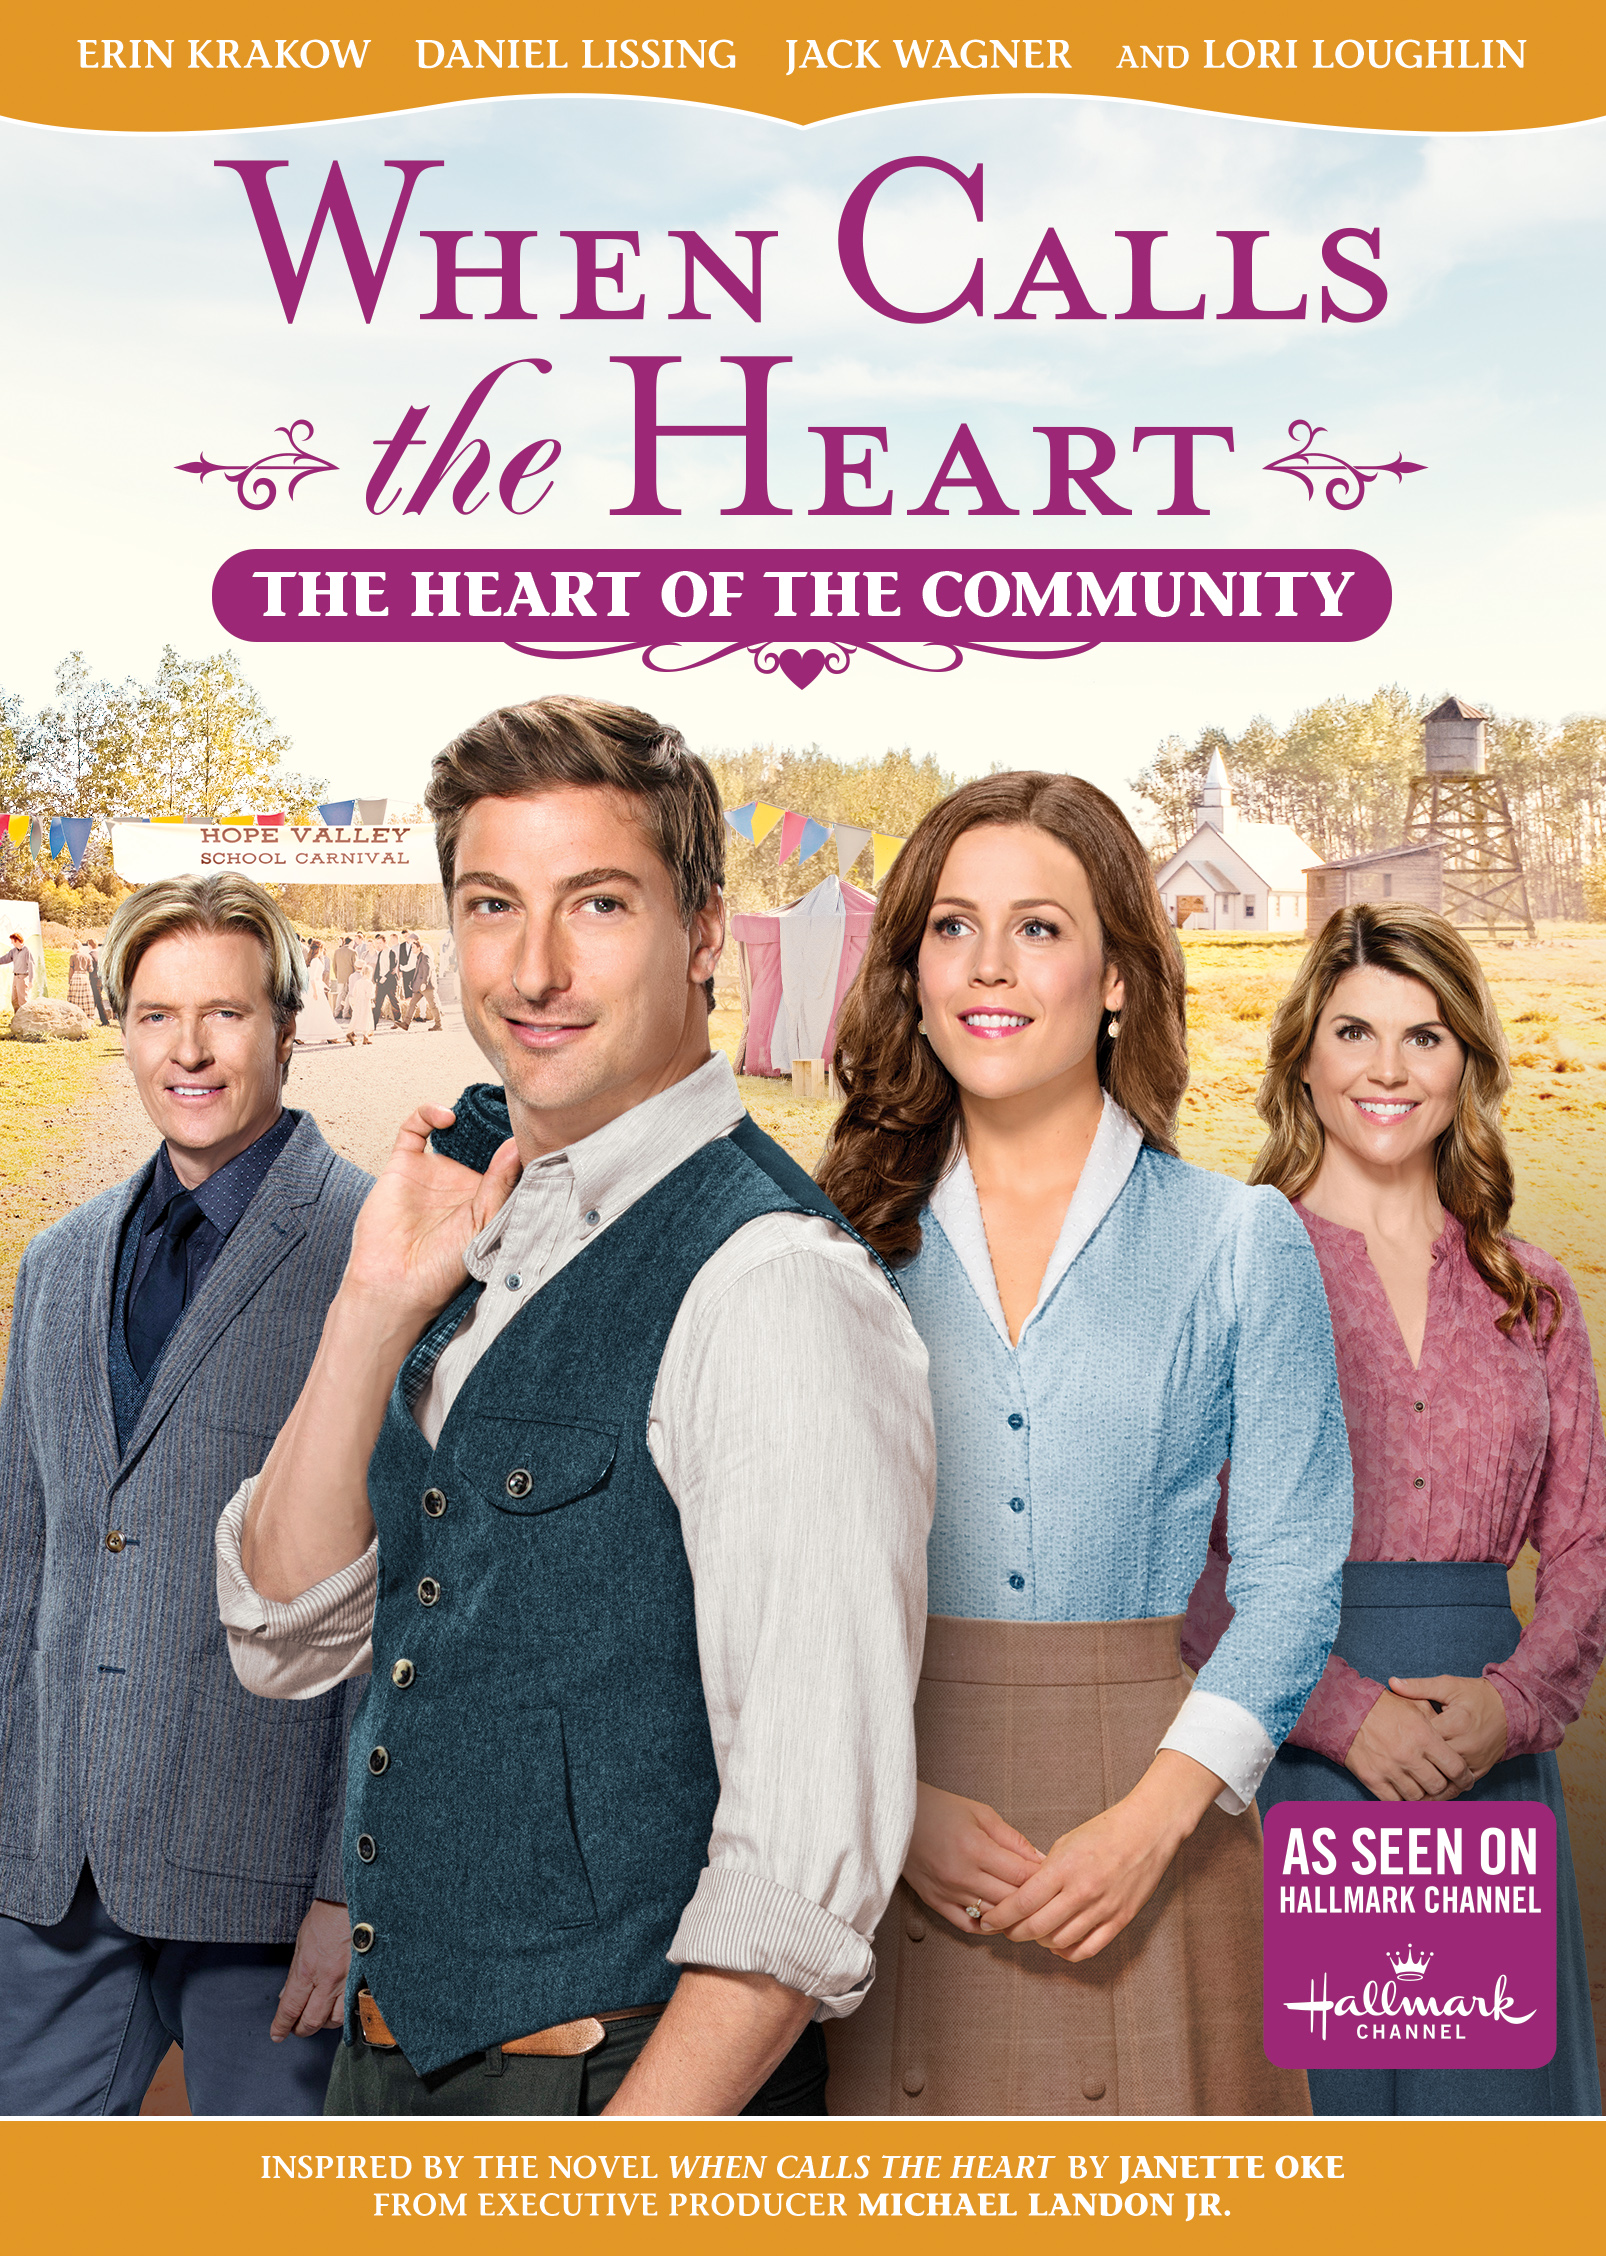 When Calls the Heart Heart of the Community (2017) Cast and Crew